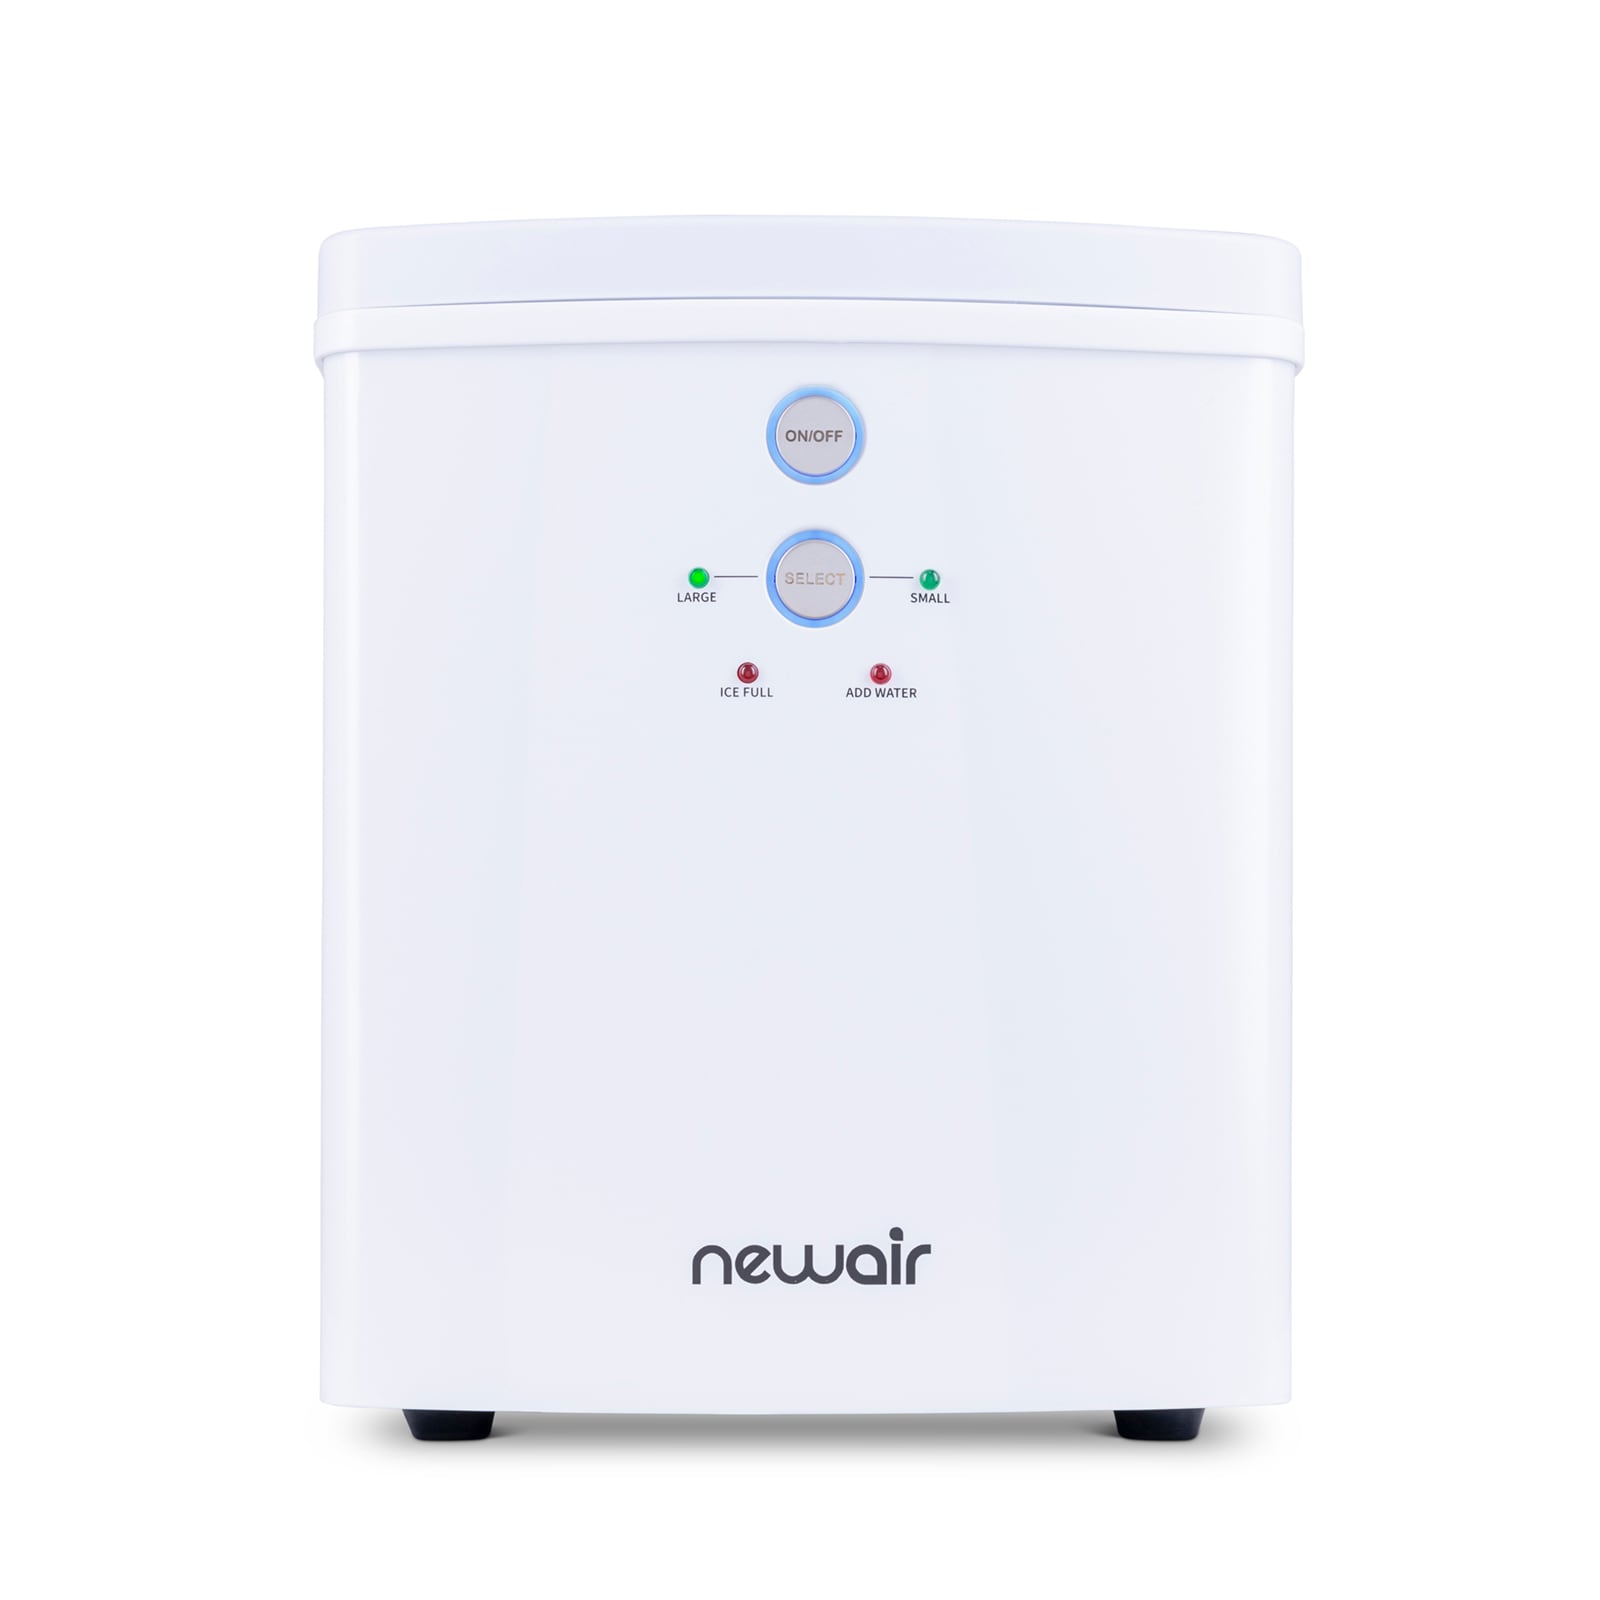 Newair 26 lbs. Countertop Ice Maker, Portable And Lightweight, Intuitive  Control, Large Or Small Ice Size in Matte Black